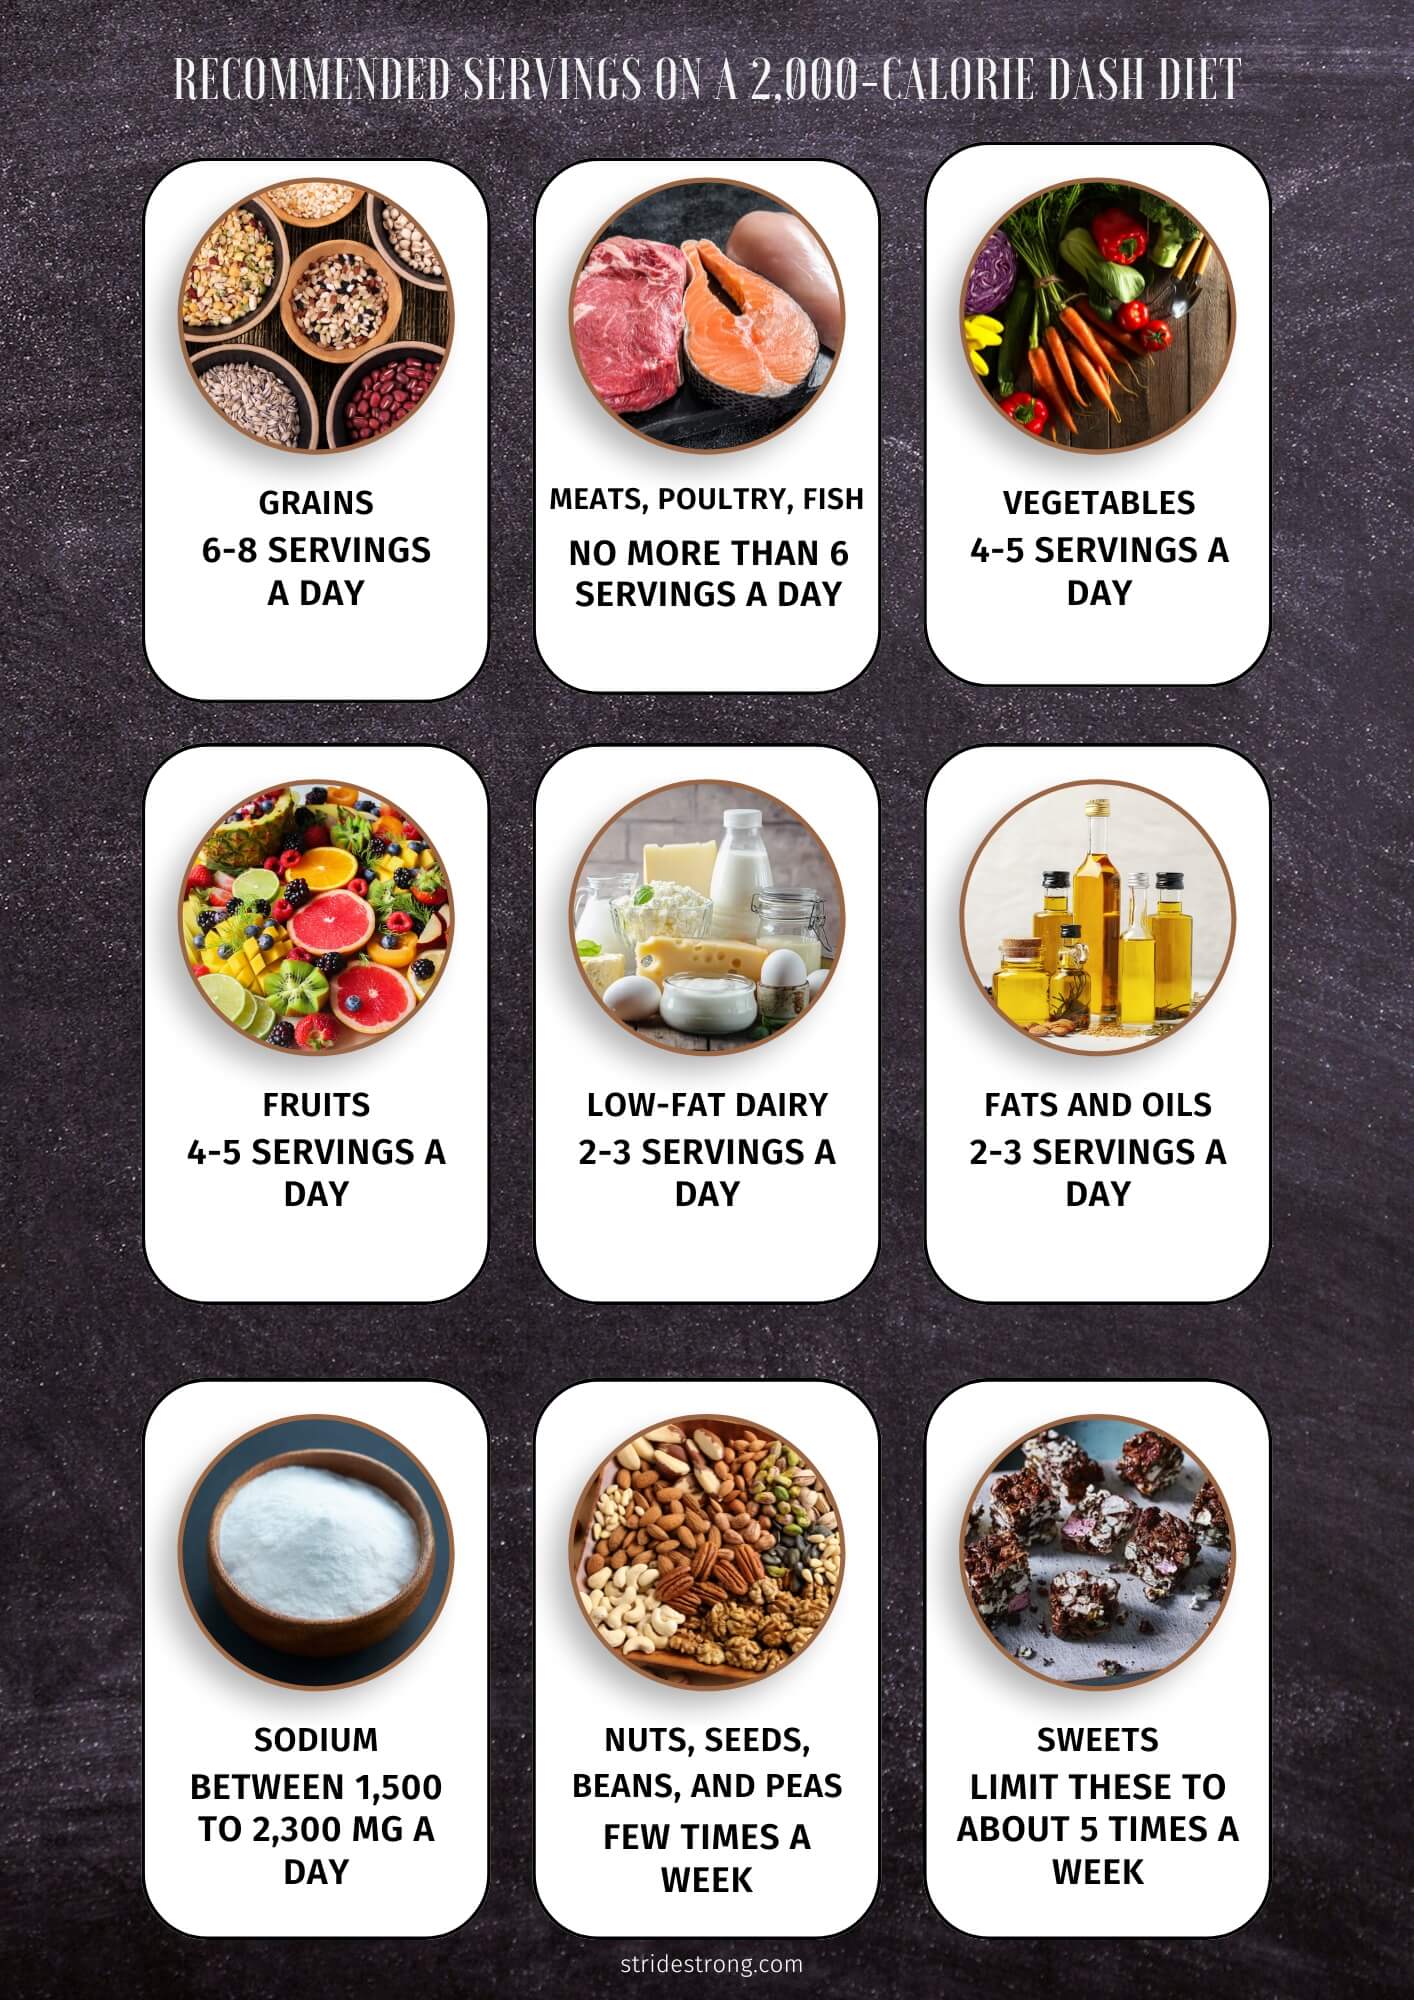 Recommended Servings on a 2,000-Calorie DASH Diet